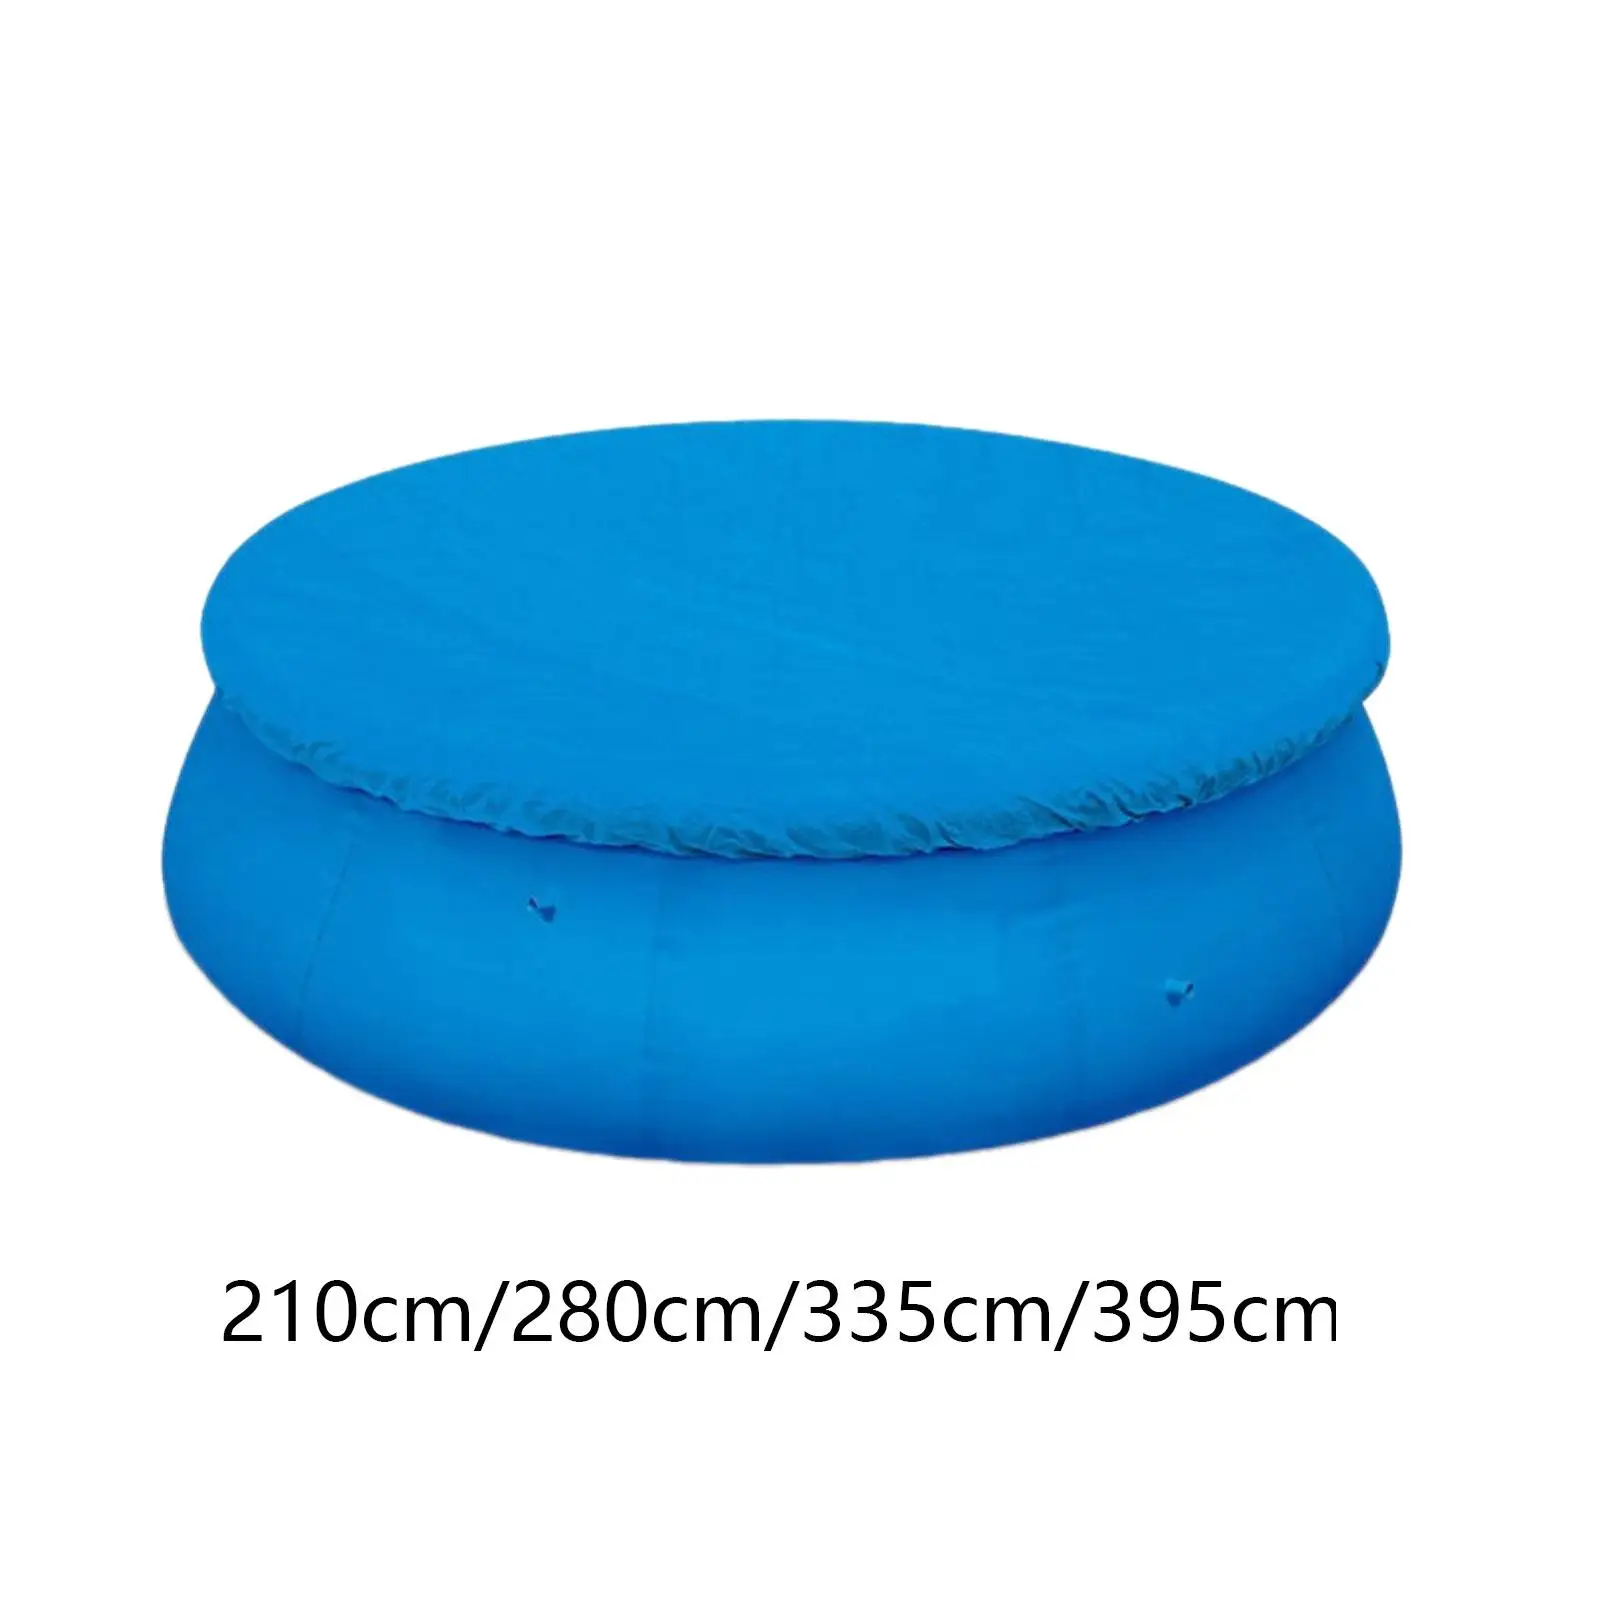 Round Pool Cover Water Resistant Drawstring Design Swimming Pool Cover for Outdoor Paddling Family Pool Cover above Ground Pool